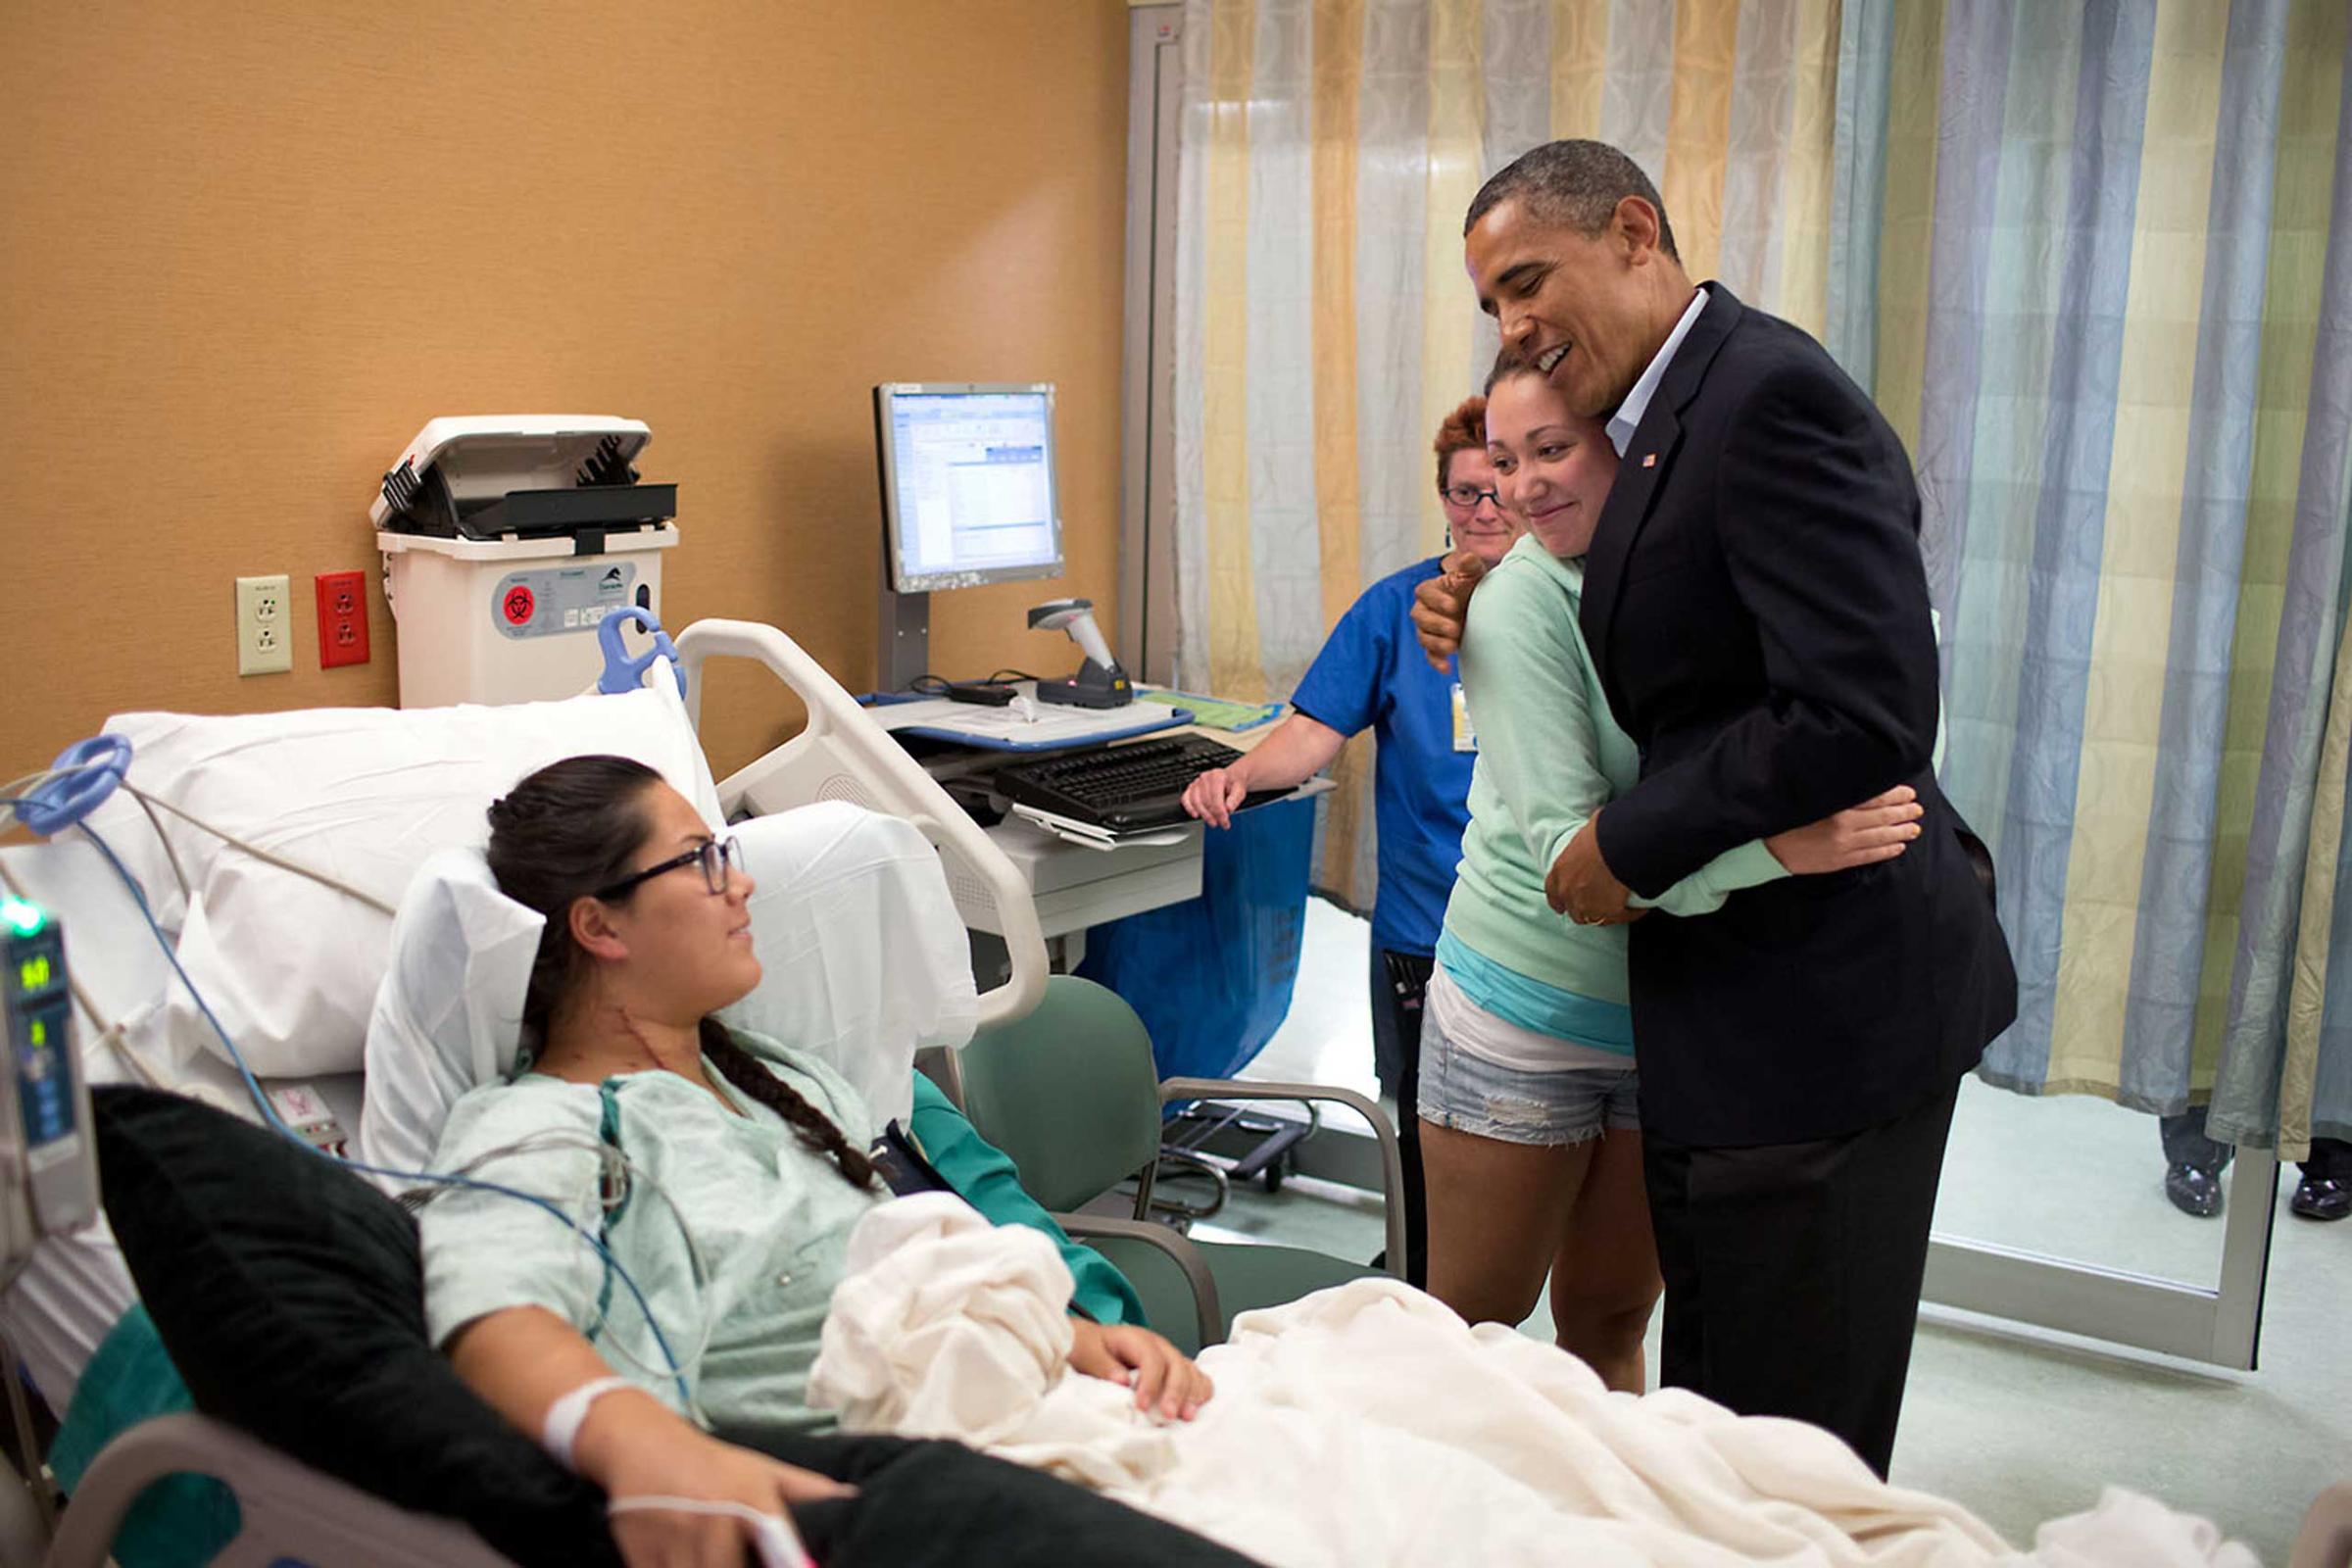 President Obama hugs Stephanie Davies while visiting shooting victim Allie Young at the University of Colorado Hospital in Aurora, Colo., July 22, 2012. Davies helped keep Young alive after her friend was wounded at the movie theater in Aurora. The President traveled to Colorado to visit with patients and family members affected by the shootings.